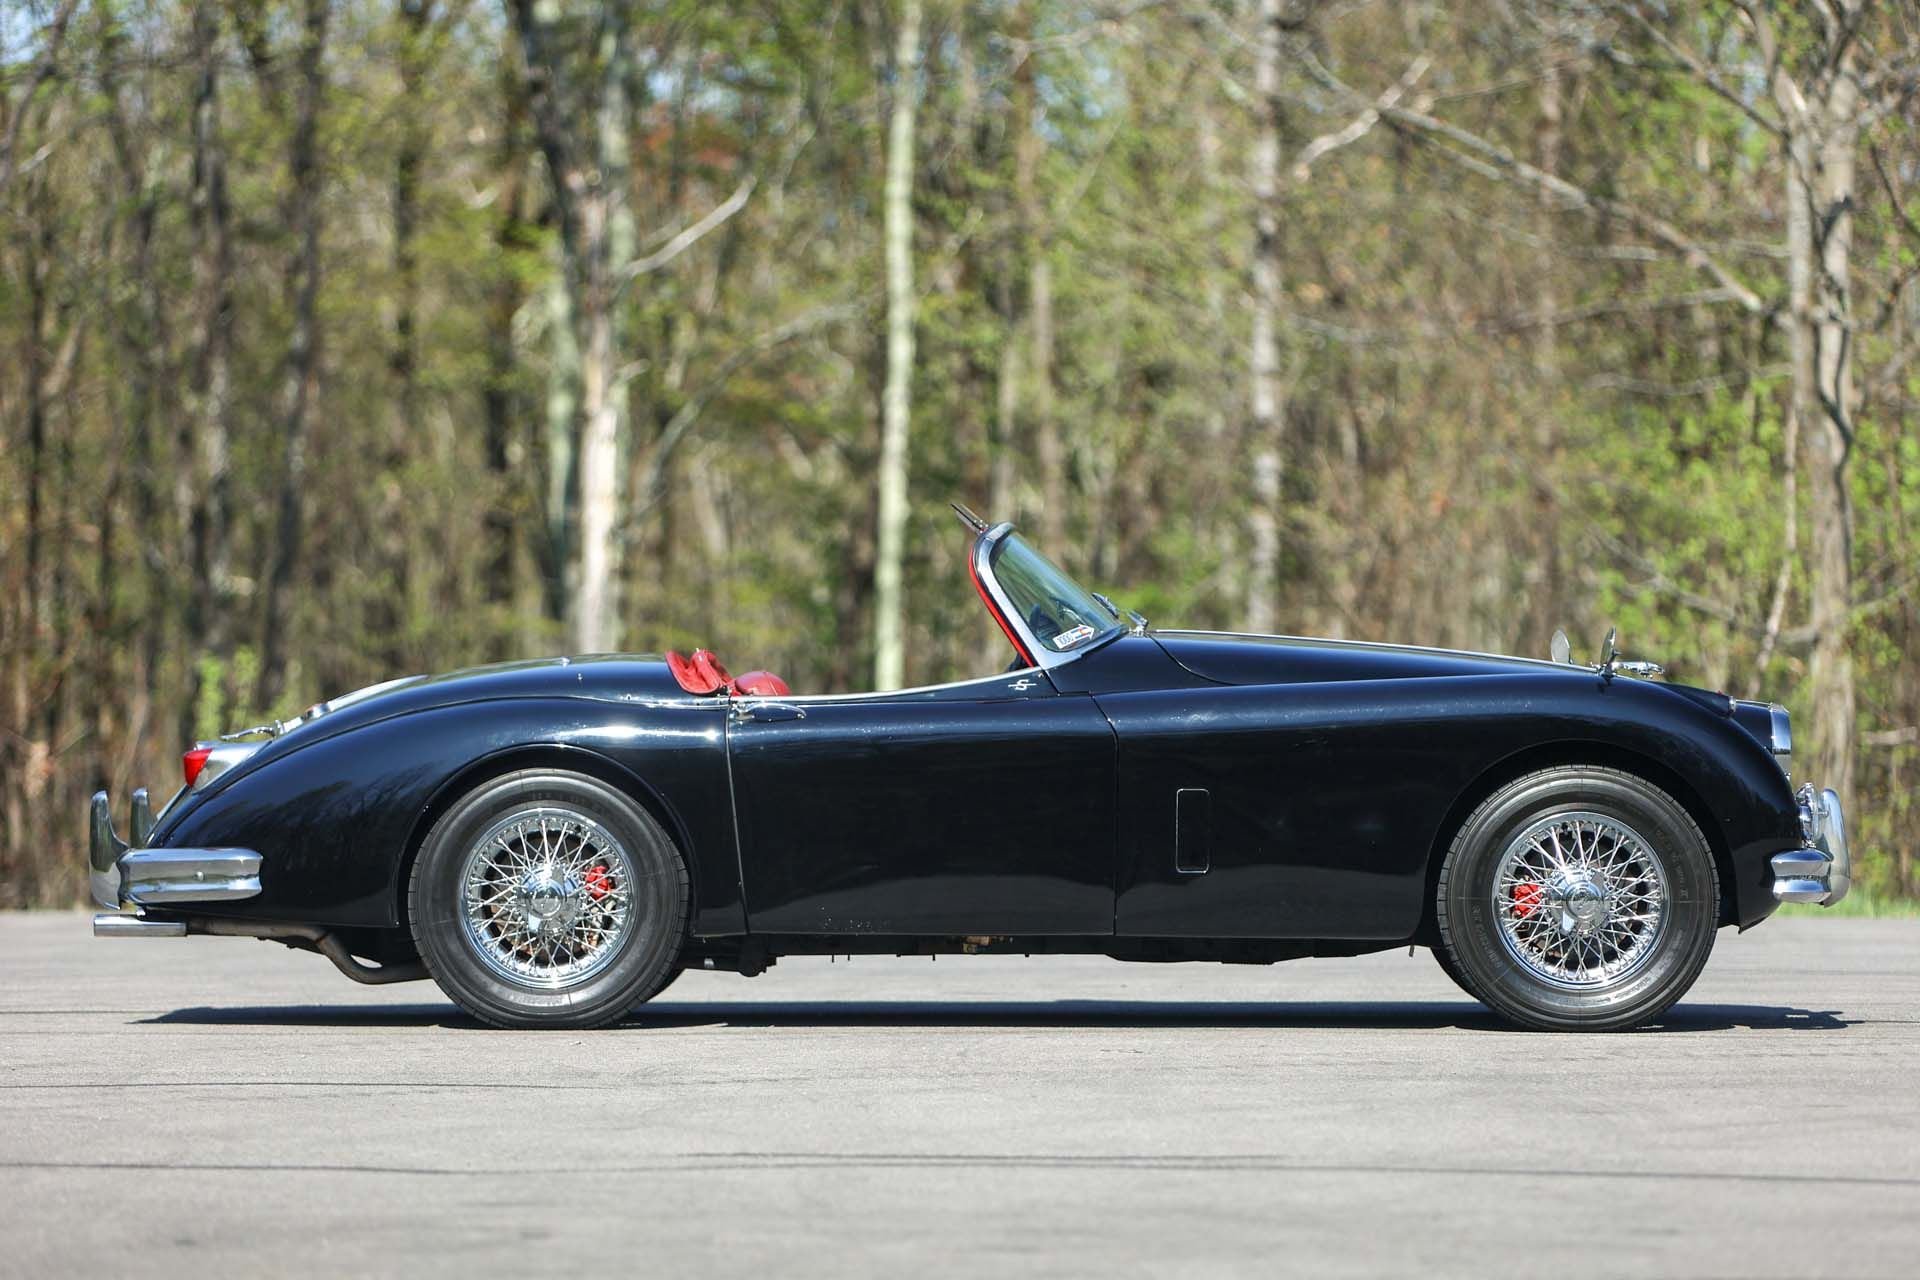 1958 Jaguar XK 150 S 3.4 Roadster | Passion for the Drive: The Cars of Jim  Taylor | Collector Car Auctions | Broad Arrow Auctions